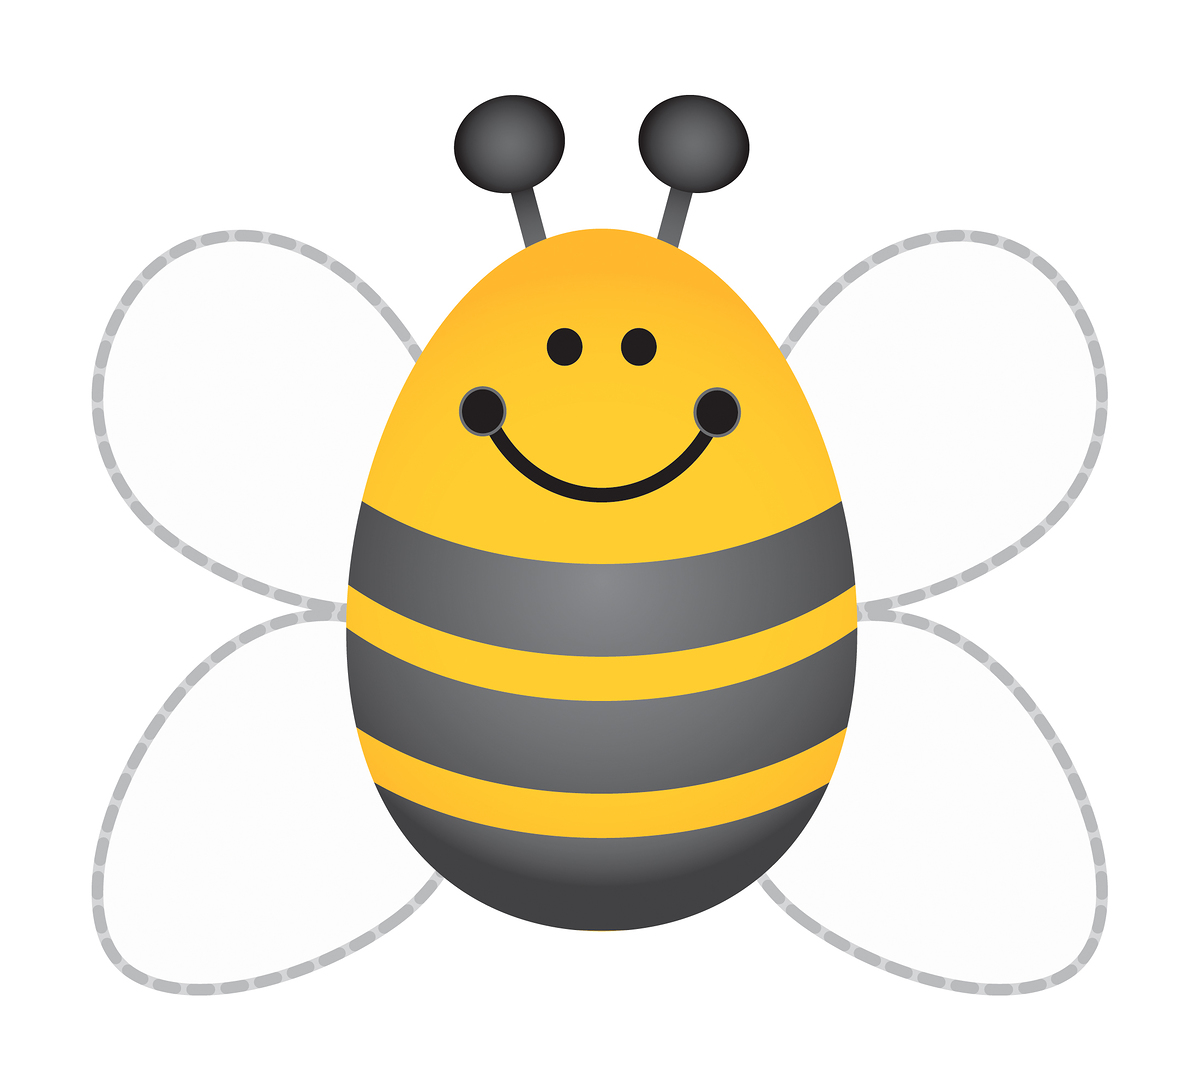 Bumble Bee Clip Art Free - Clipart library